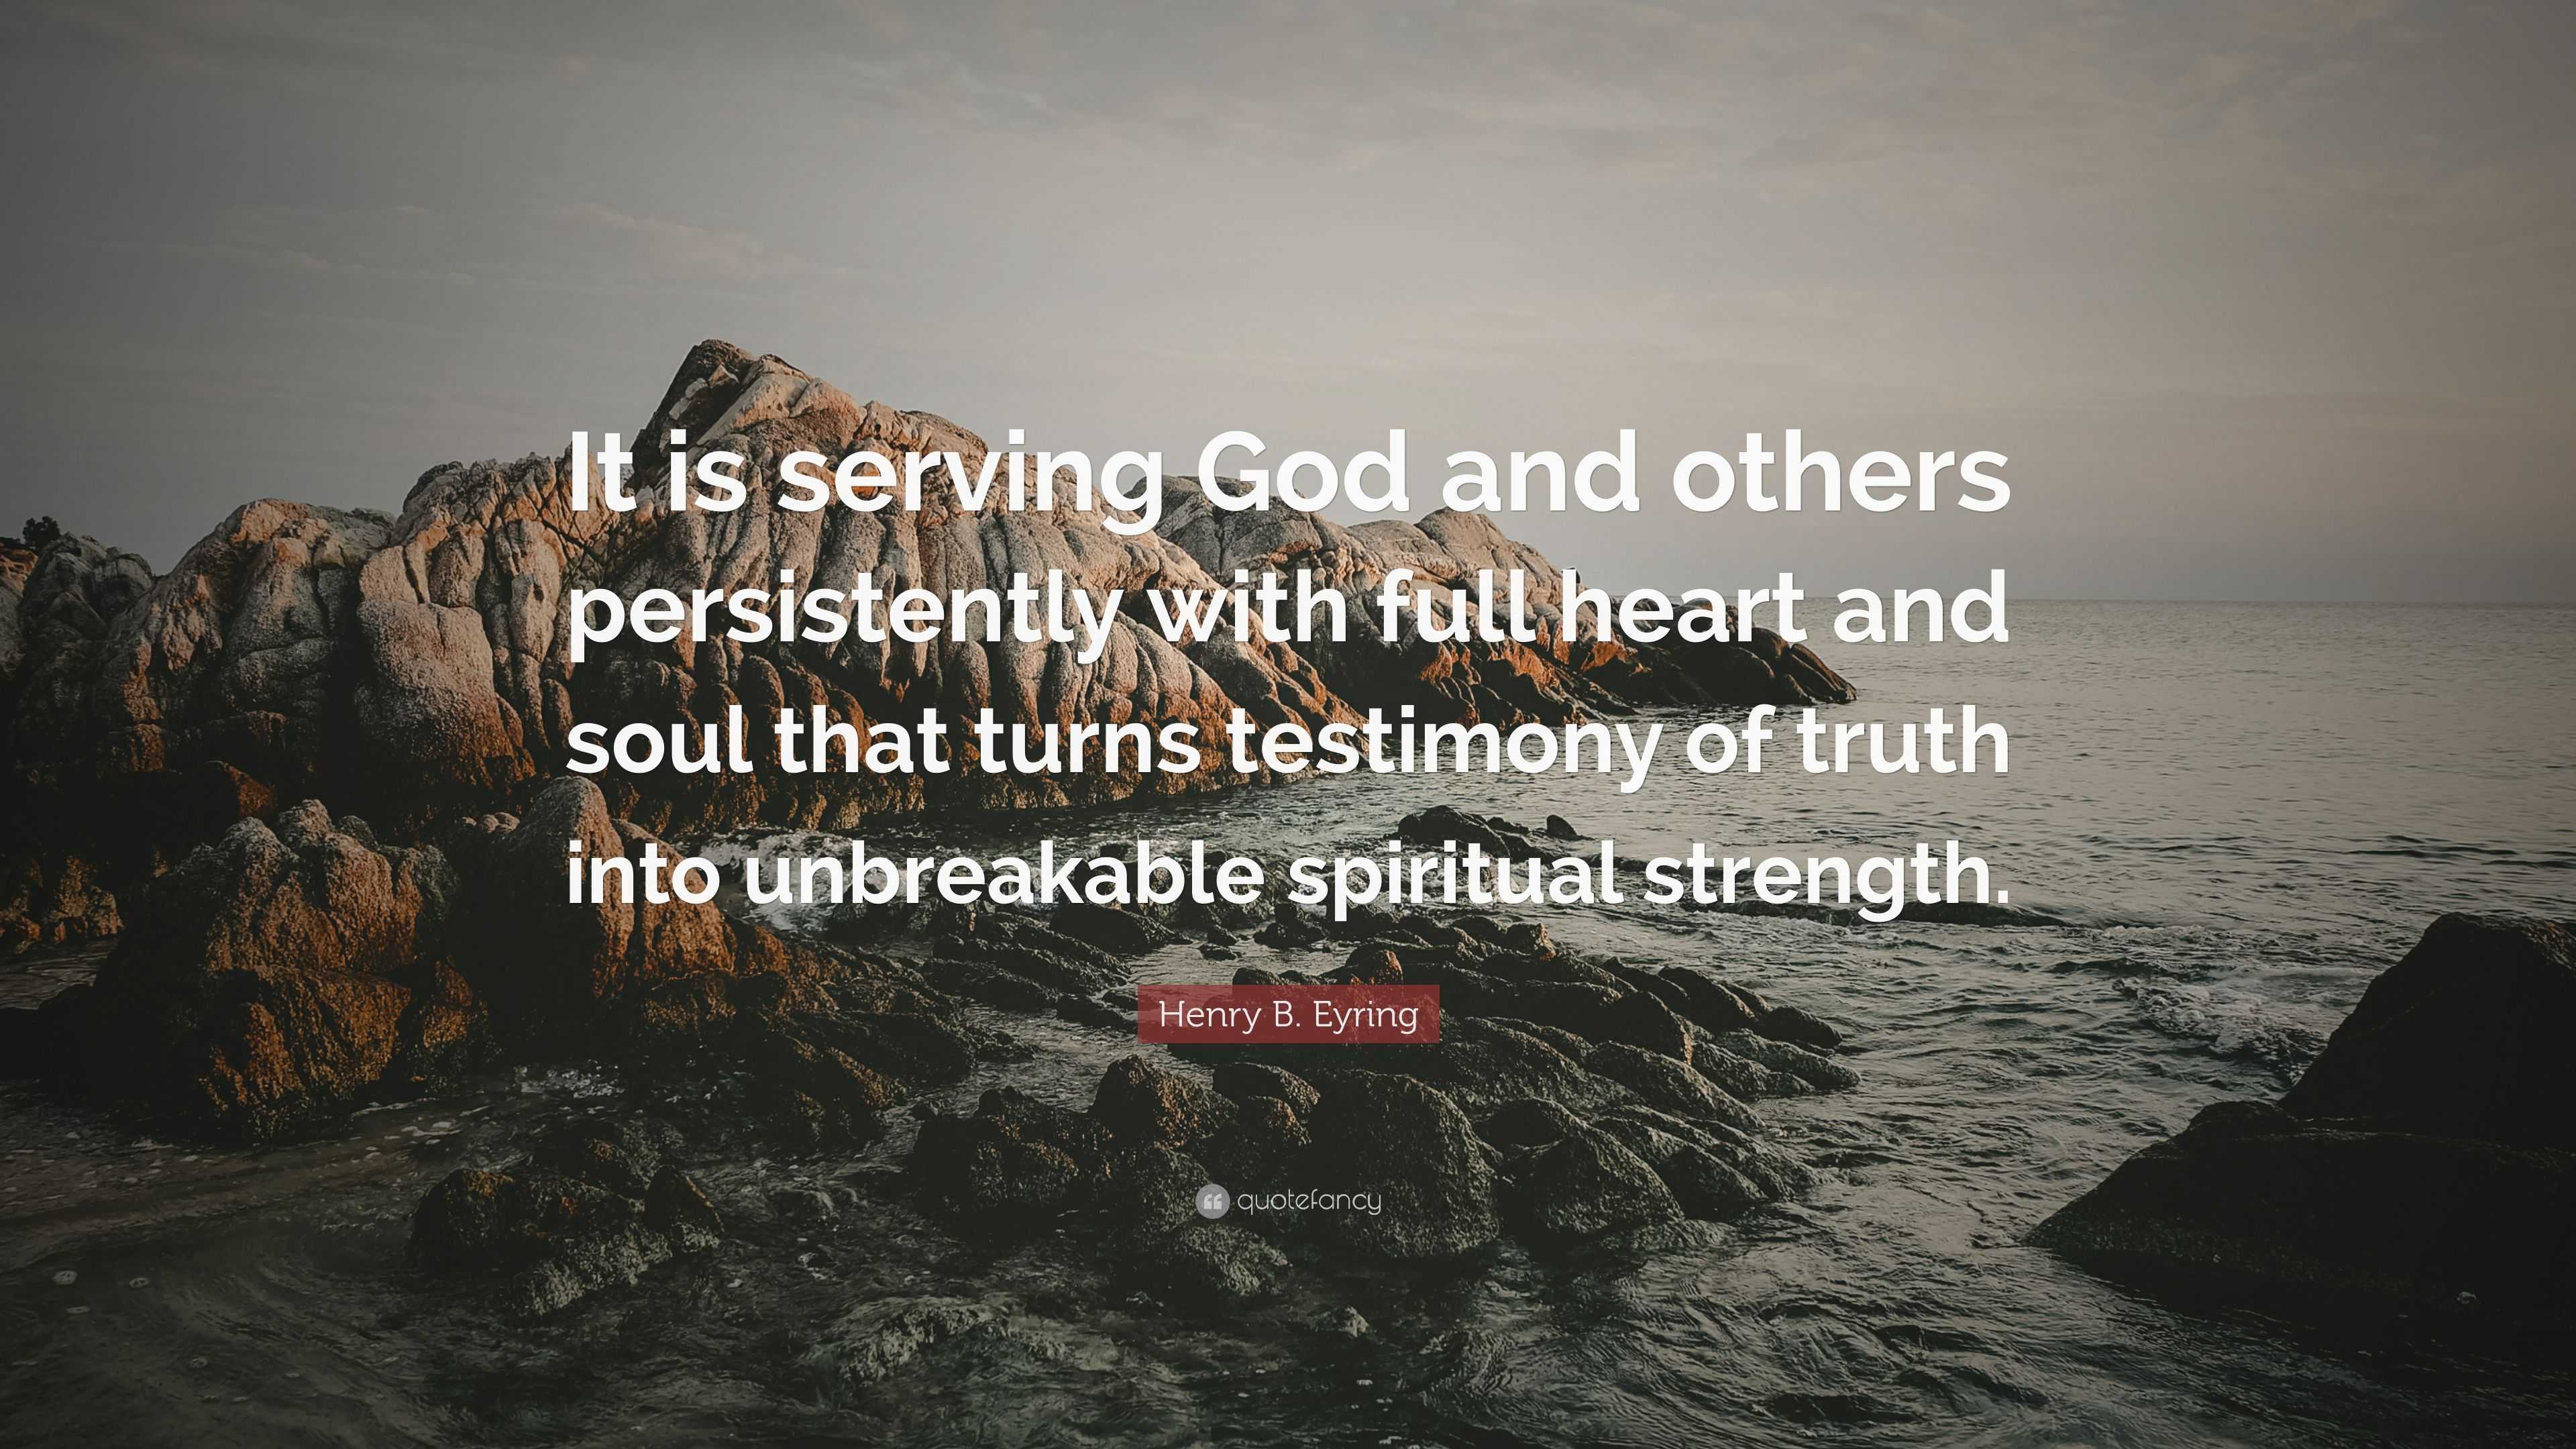 Henry B. Eyring Quote “It is serving God and others